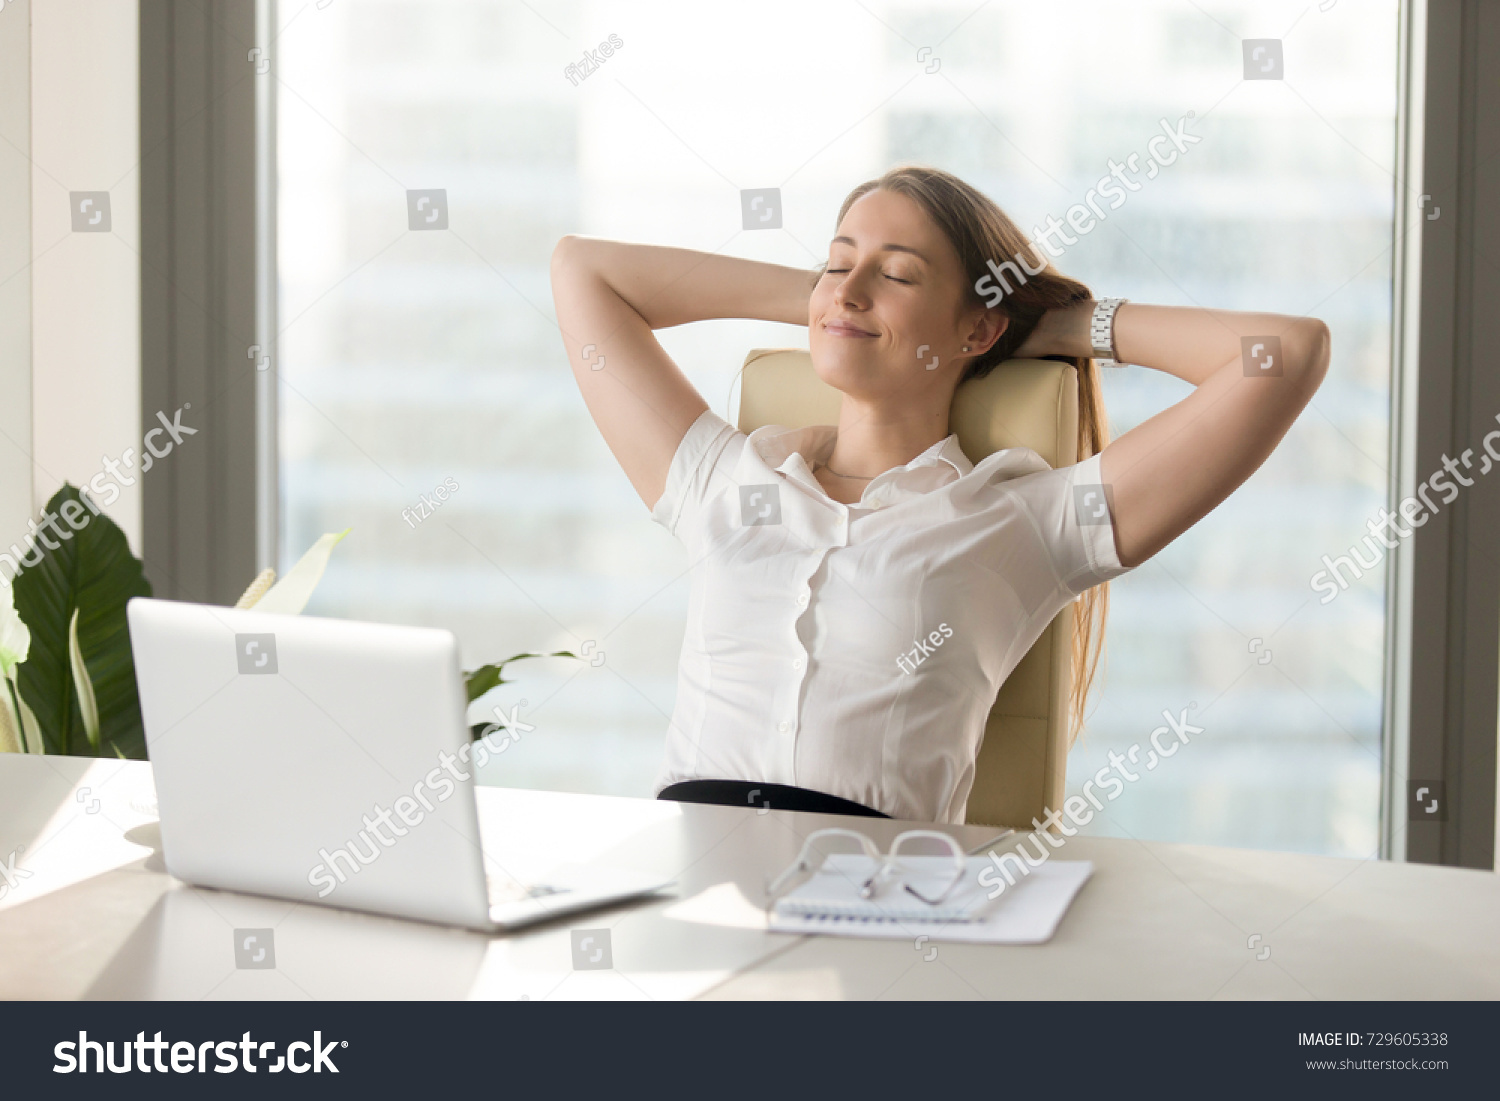 Calm smiling businesswoman relaxing at comfortable office chair hands behind head, happy woman resting in office satisfied after work done, enjoying break with eyes closed, peace of mind, no stress #729605338